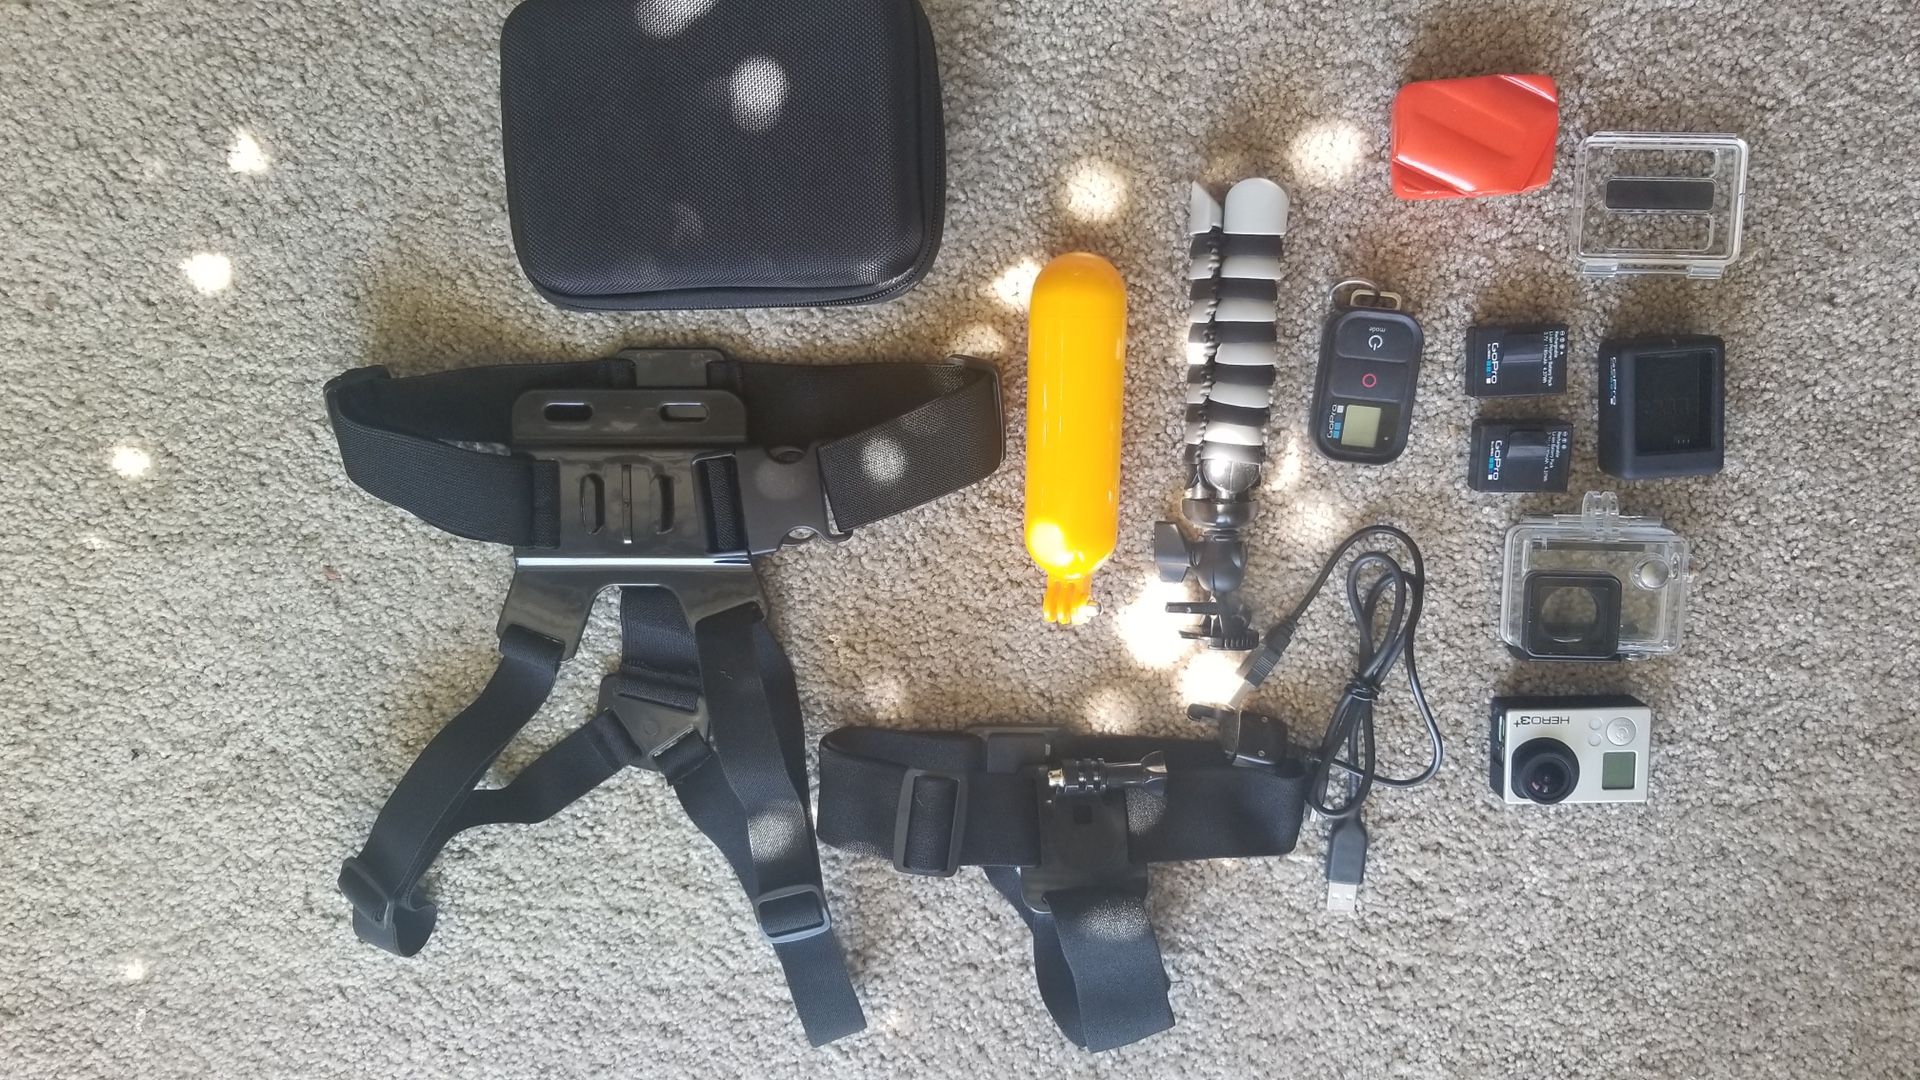 GoPro Hero 3+ with Accessories